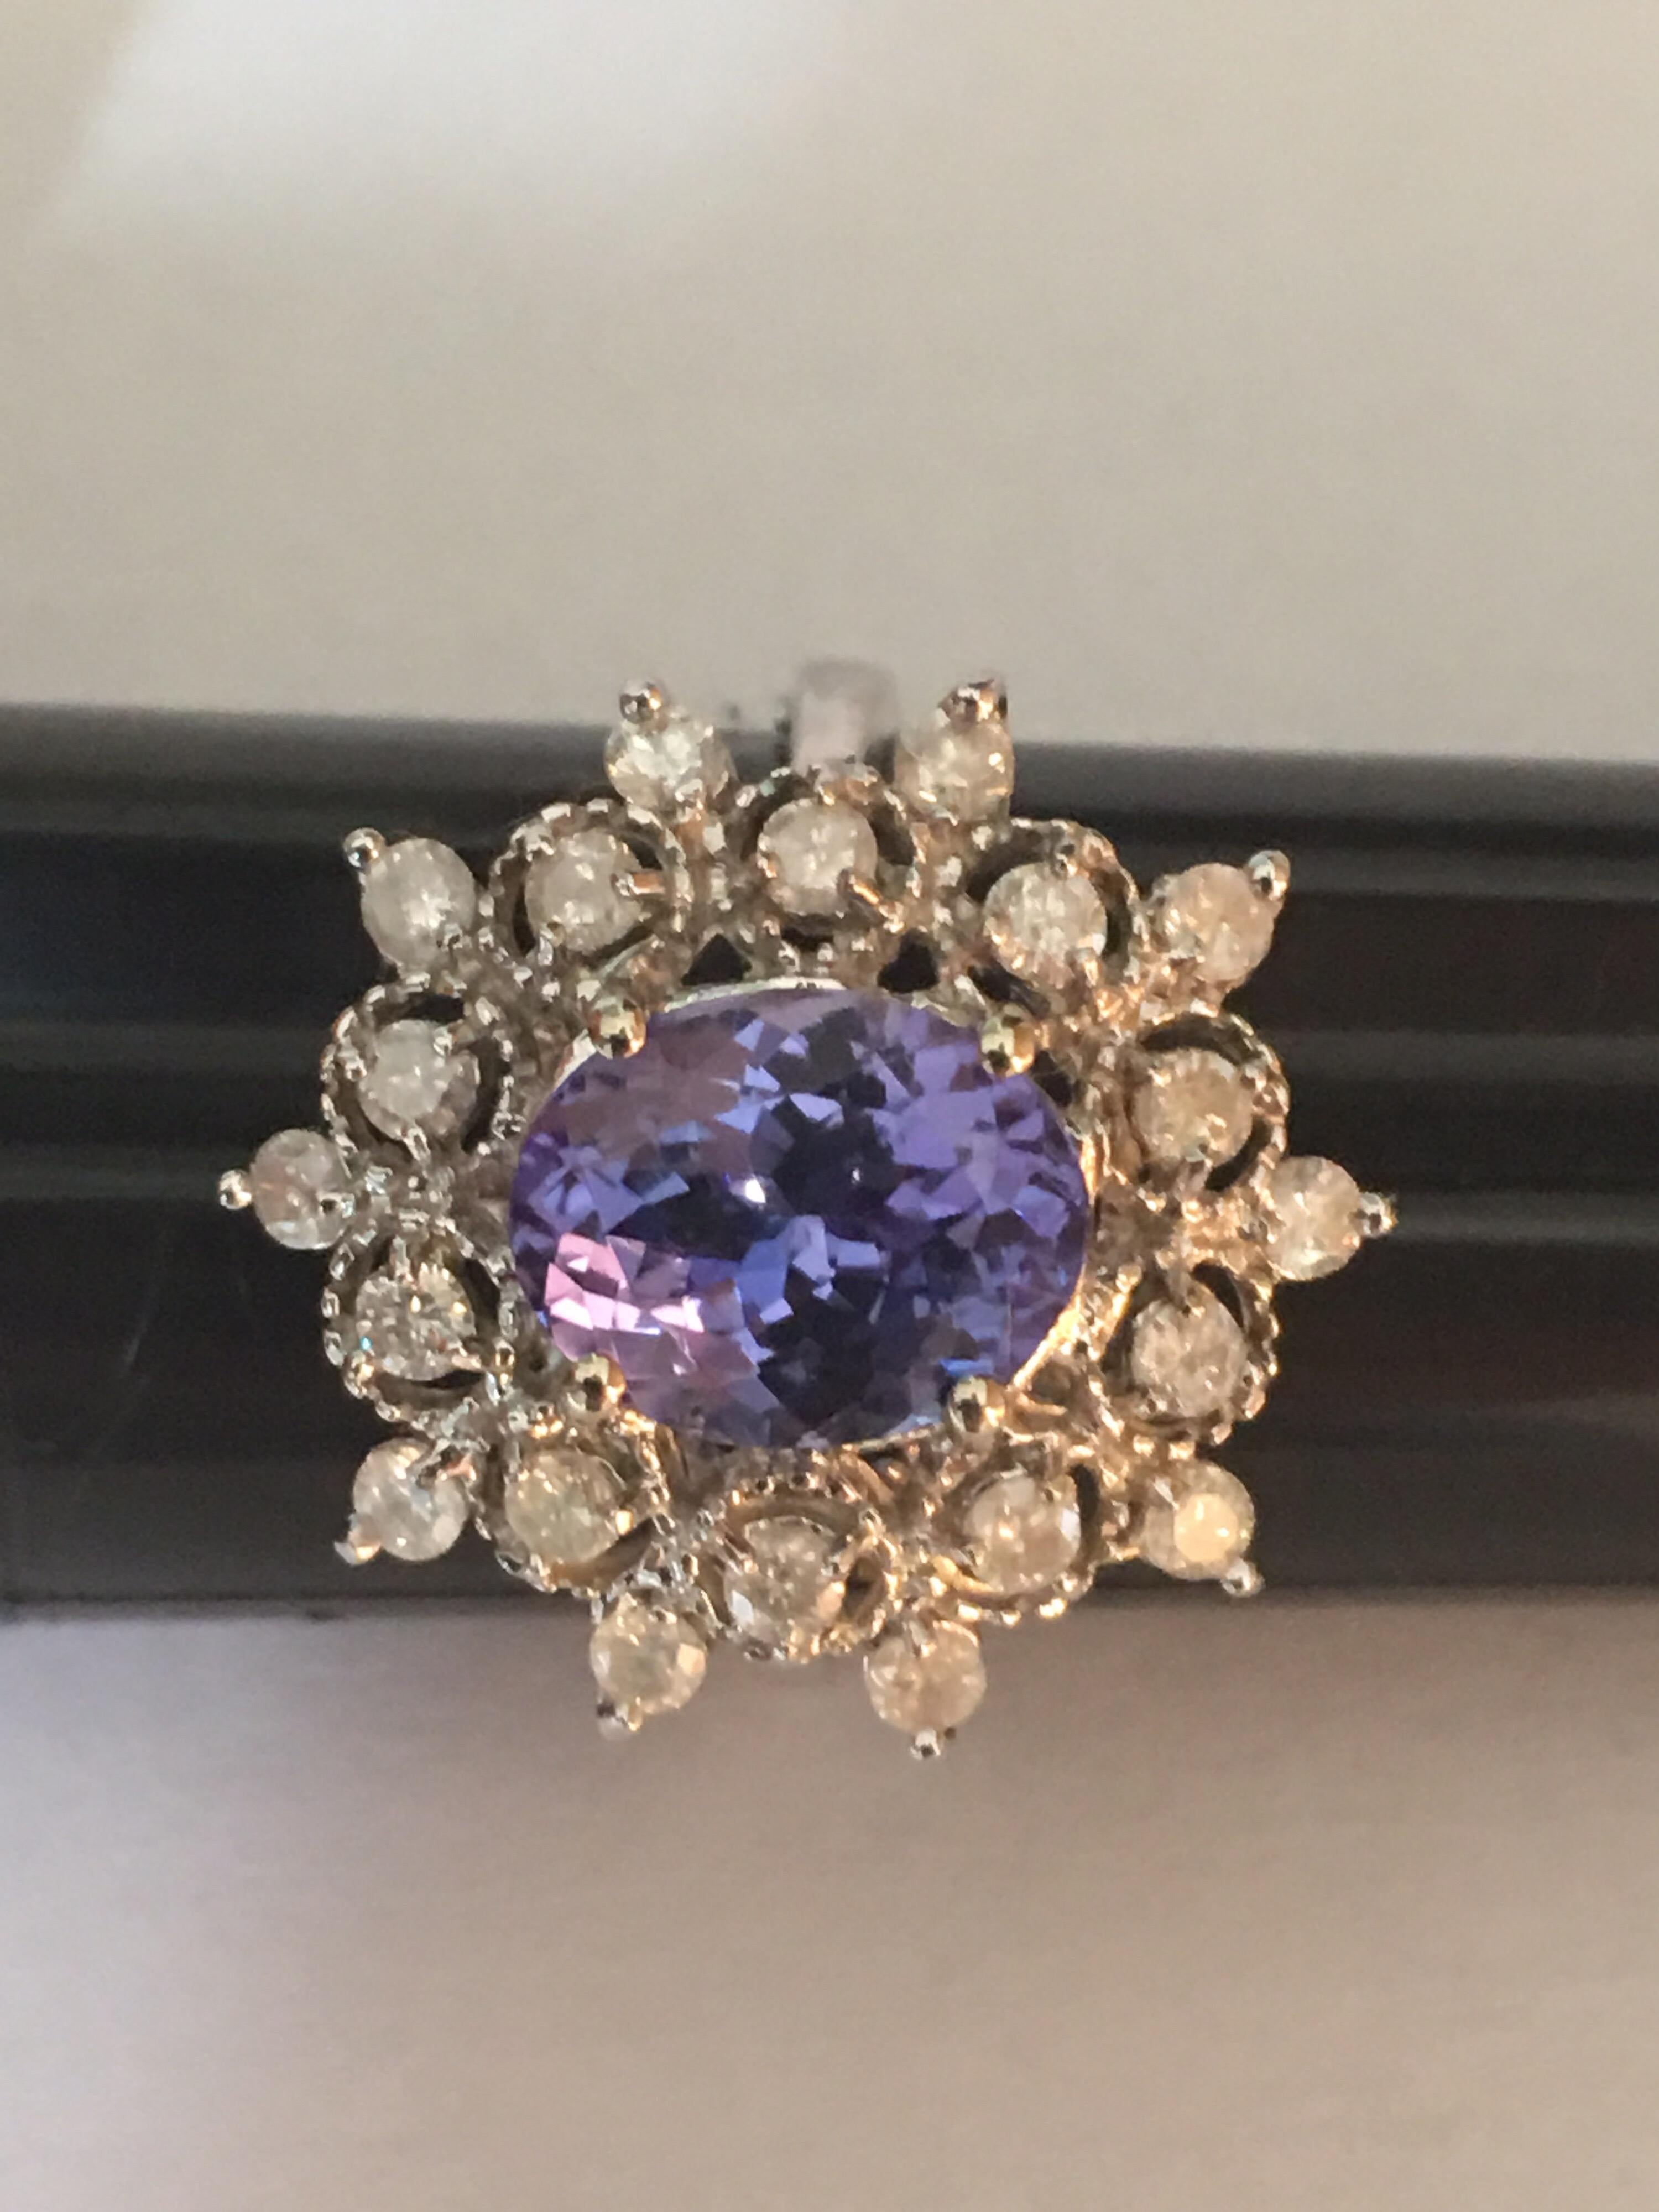 Natural 8mm X 10 mm tanzanite and .04 cents 20 diamonds is set in 14 Karat White gold is Hand crafted one of a kind ring.
Size of the ring is 8 1/4. If needed can be resized.
Quality of Tanzanite is AA and diamonds are SI3 .
Total stones is 3.17